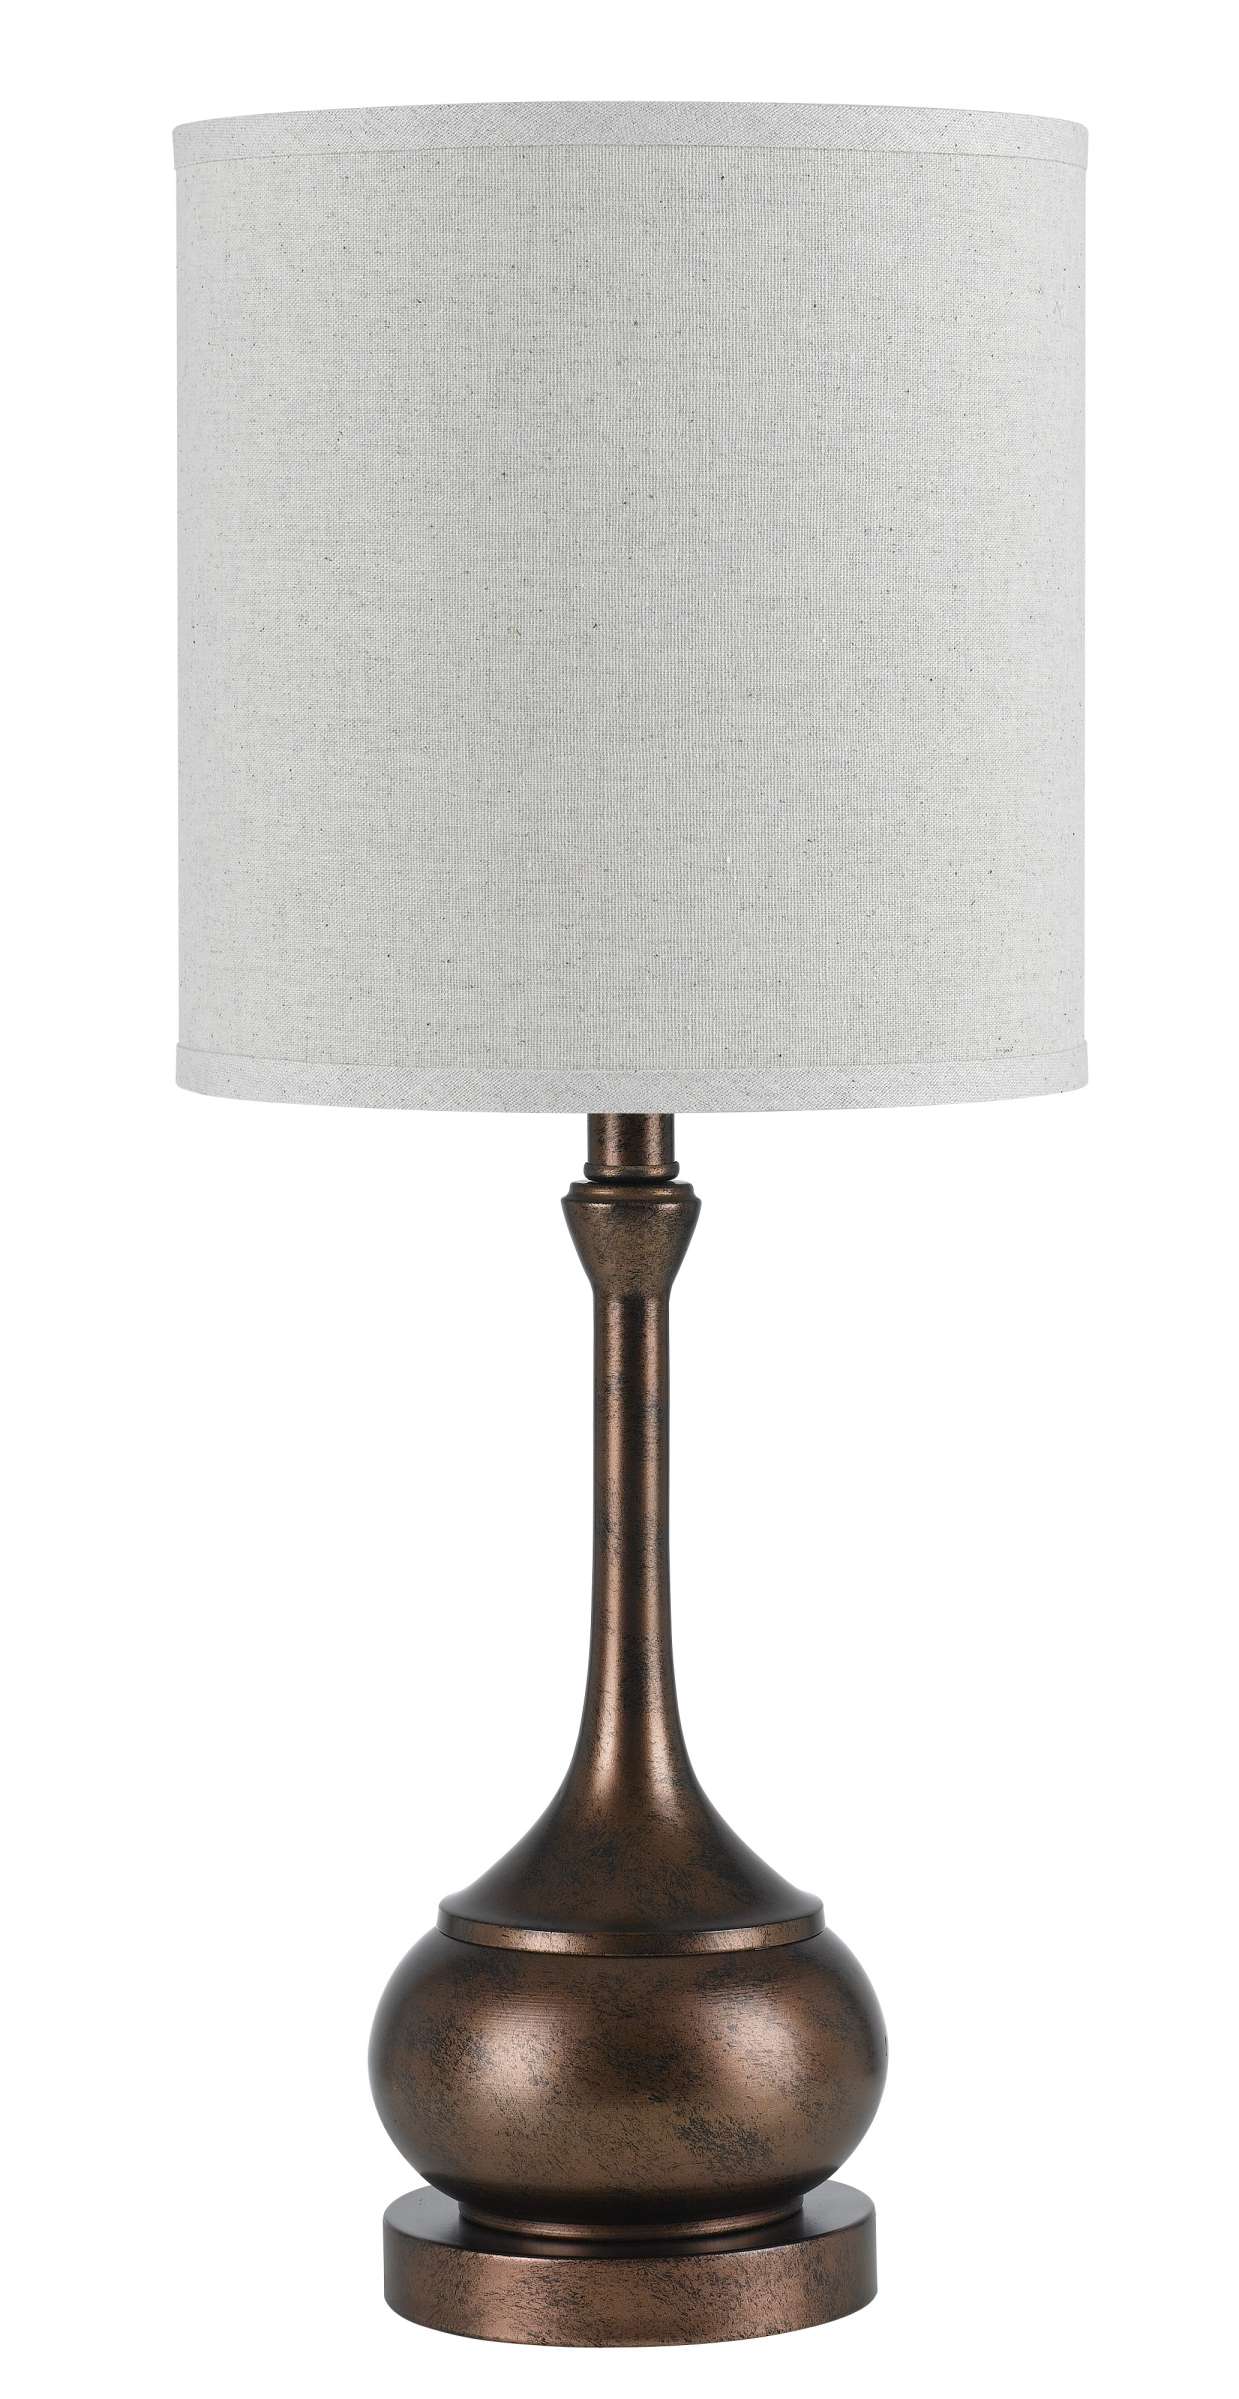 Elongated Bellied Shape Metal Accent Lamp With Drum Shade, Rustic Bronze By Benzara